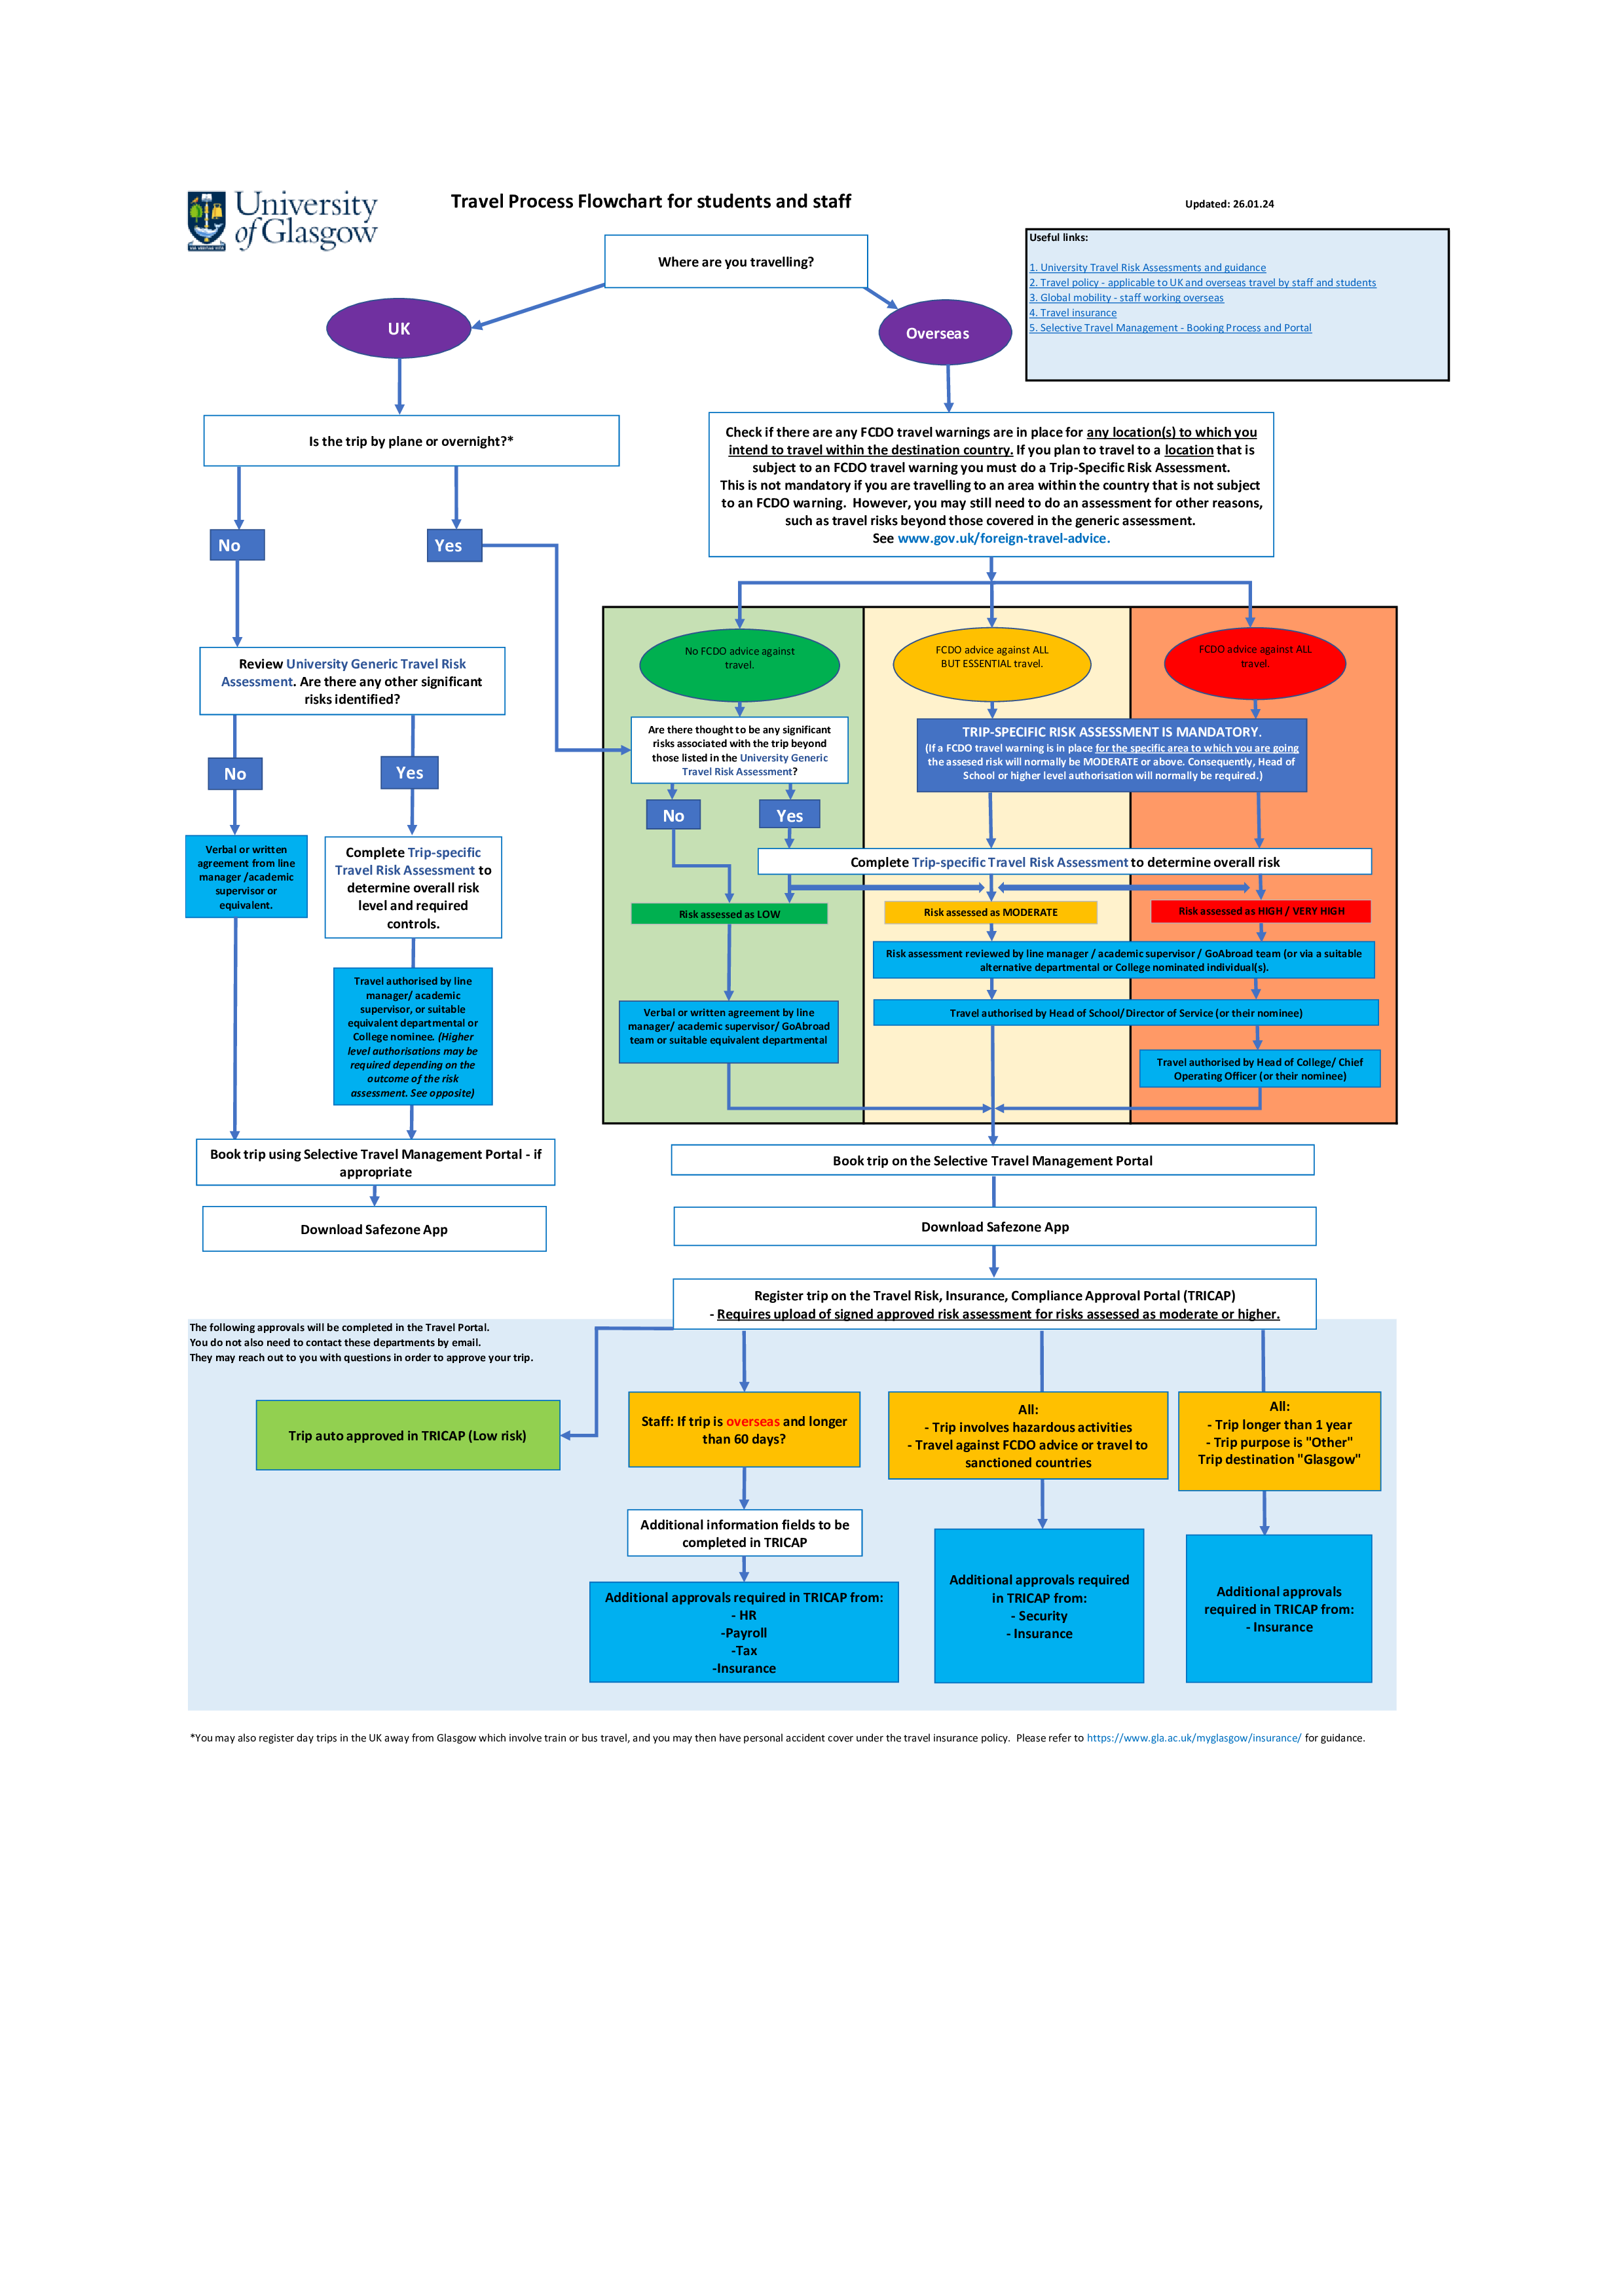 Flowchart showing travel risk assessment and booking process